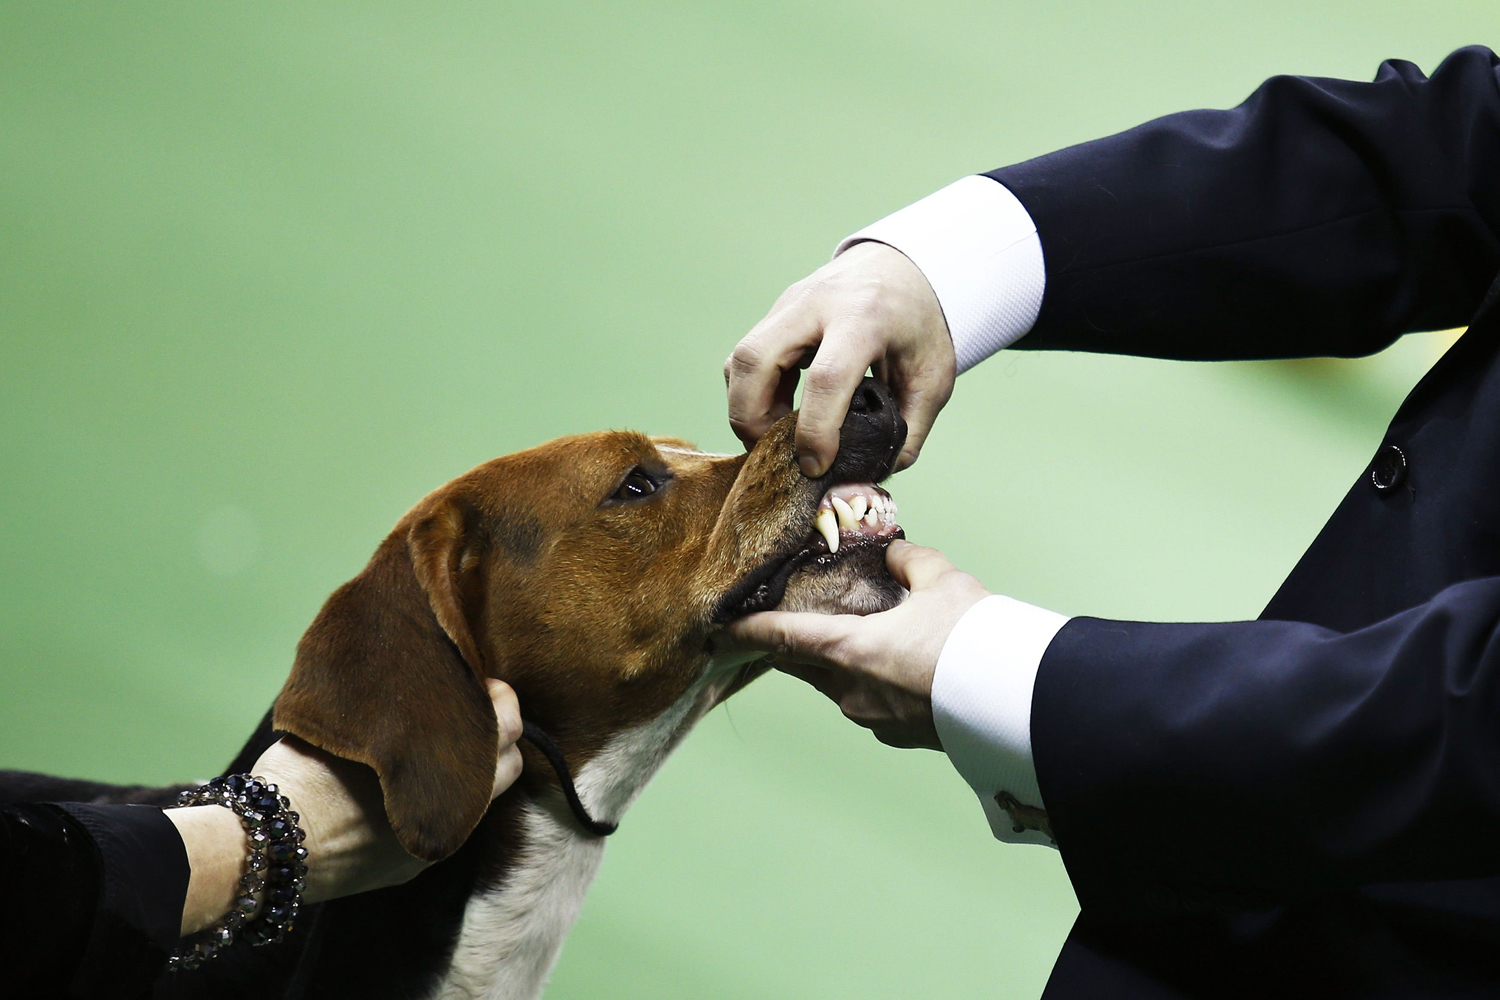 A Treeing Walker Coonhound is judged during competition at the Hound group during day one of judging of the 2014 Westminster Kennel Club Dog Show in New York